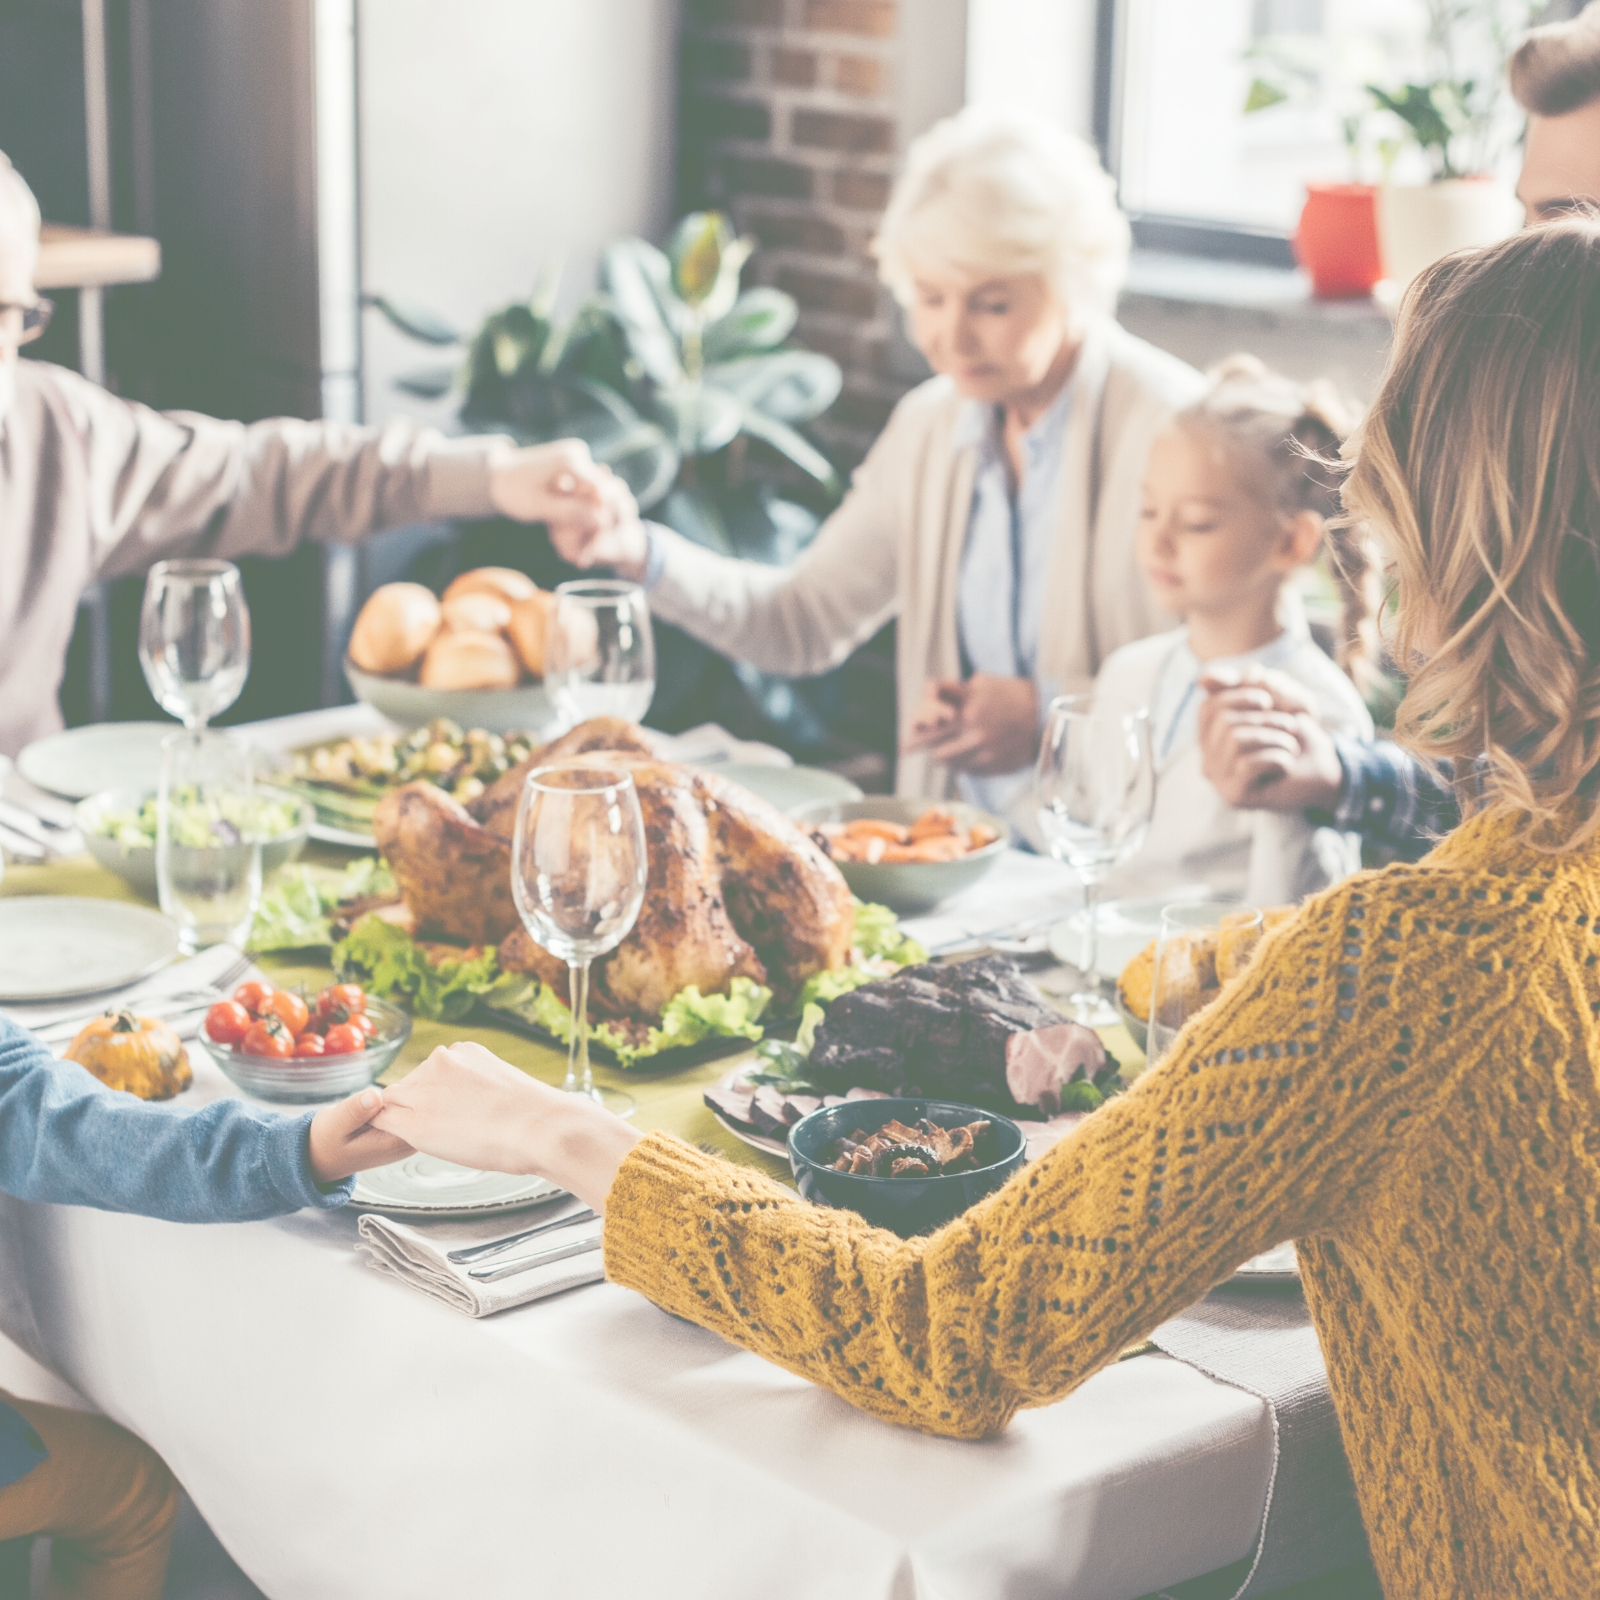 Planning for Thanksgiving: 9 Keys to Enjoying the Day with Your Family